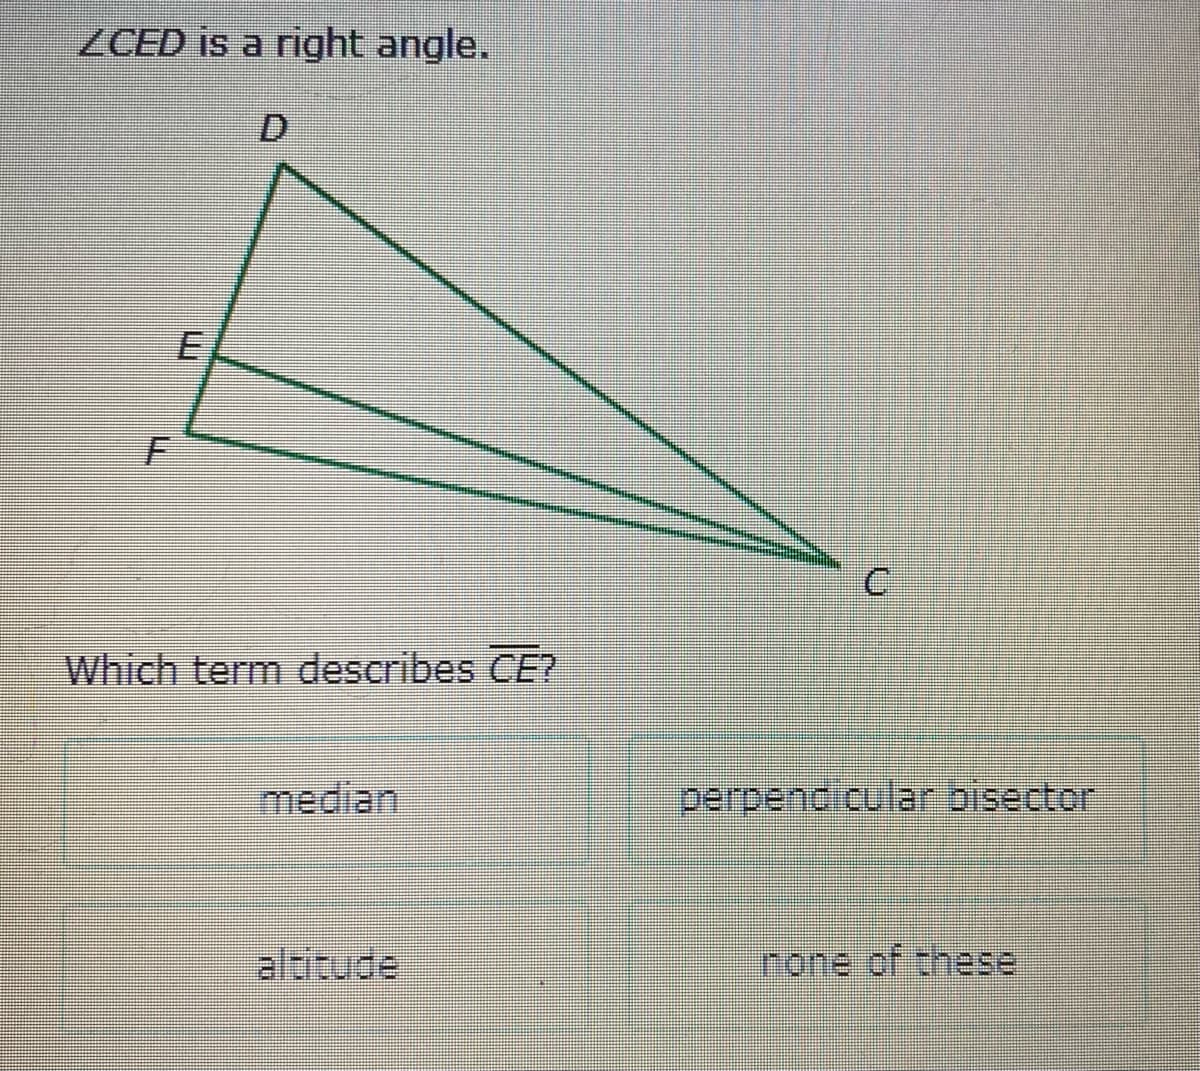 ZCED is a right angle.
D
Which term describes CE?
median
perpencicular bisector
altitude
none of these
